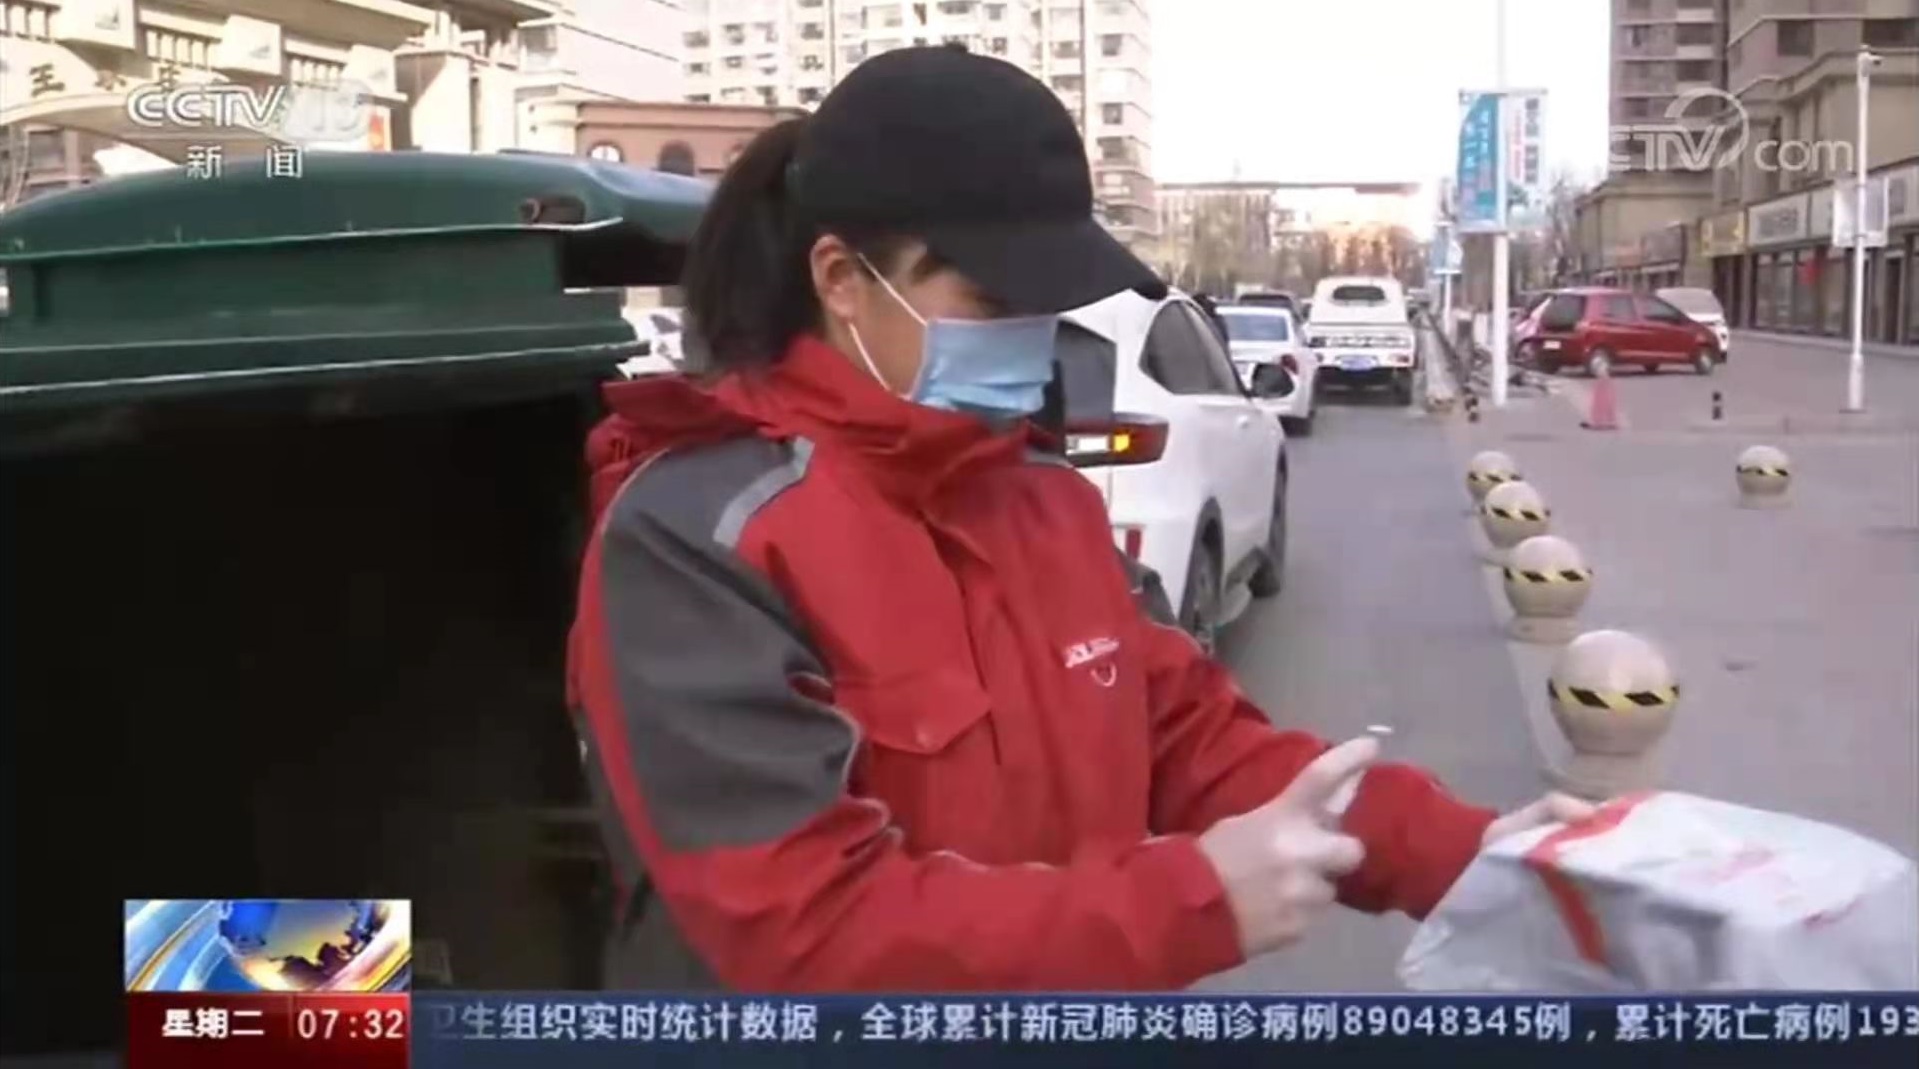 Ms. Yachan Wu, a courier at JD’s Luancheng delivery station in Shijiazhuang, told National TV